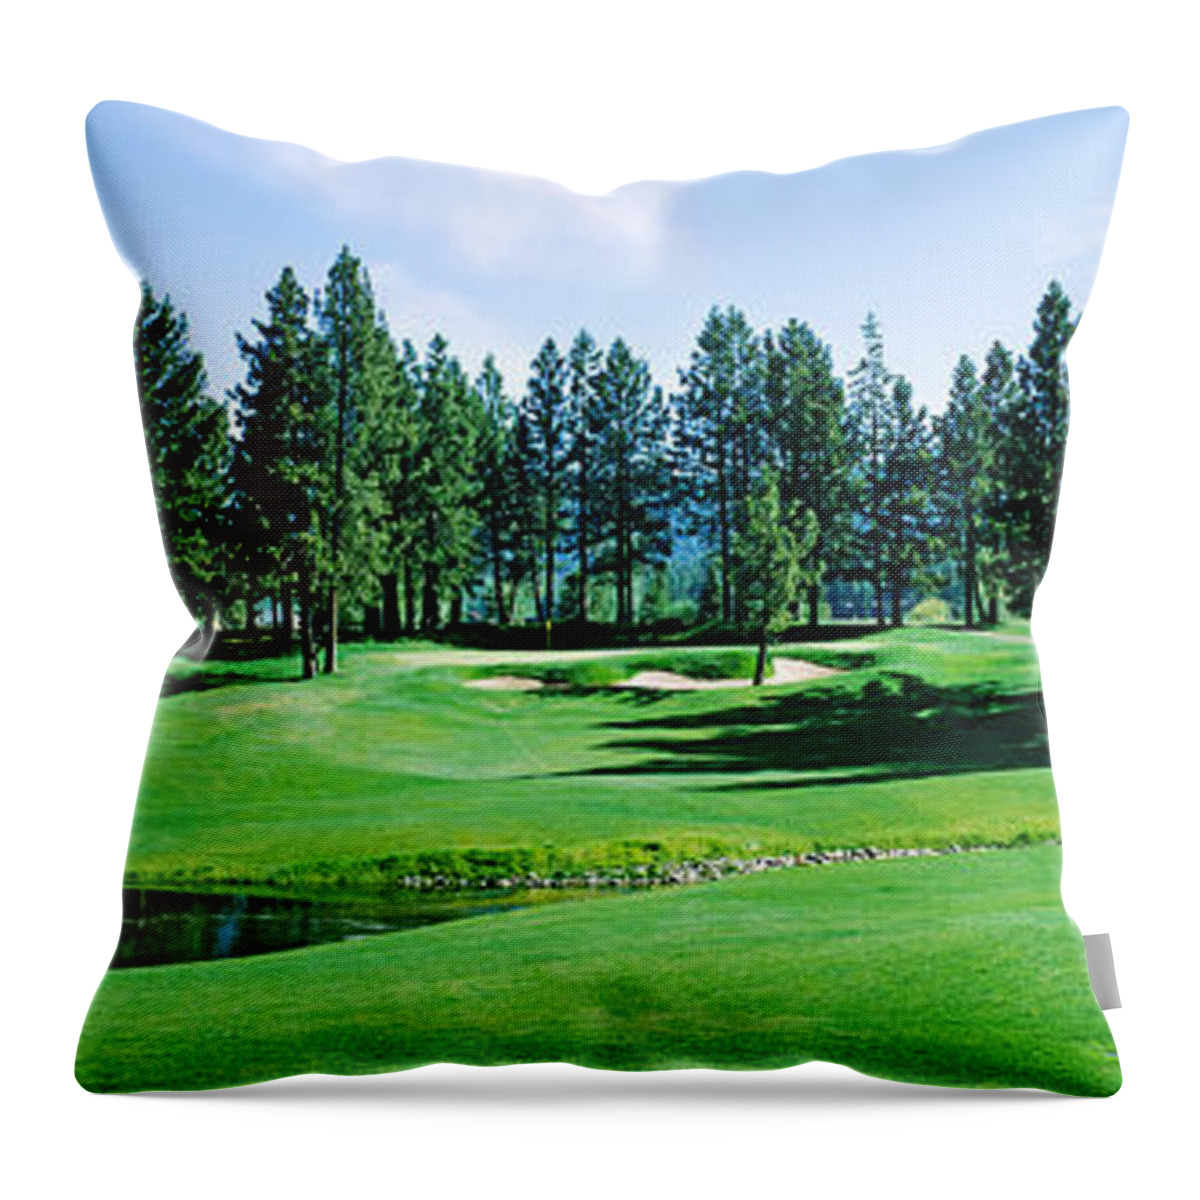 Photography Throw Pillow featuring the photograph Golf Course, Edgewood Tahoe Golf by Panoramic Images